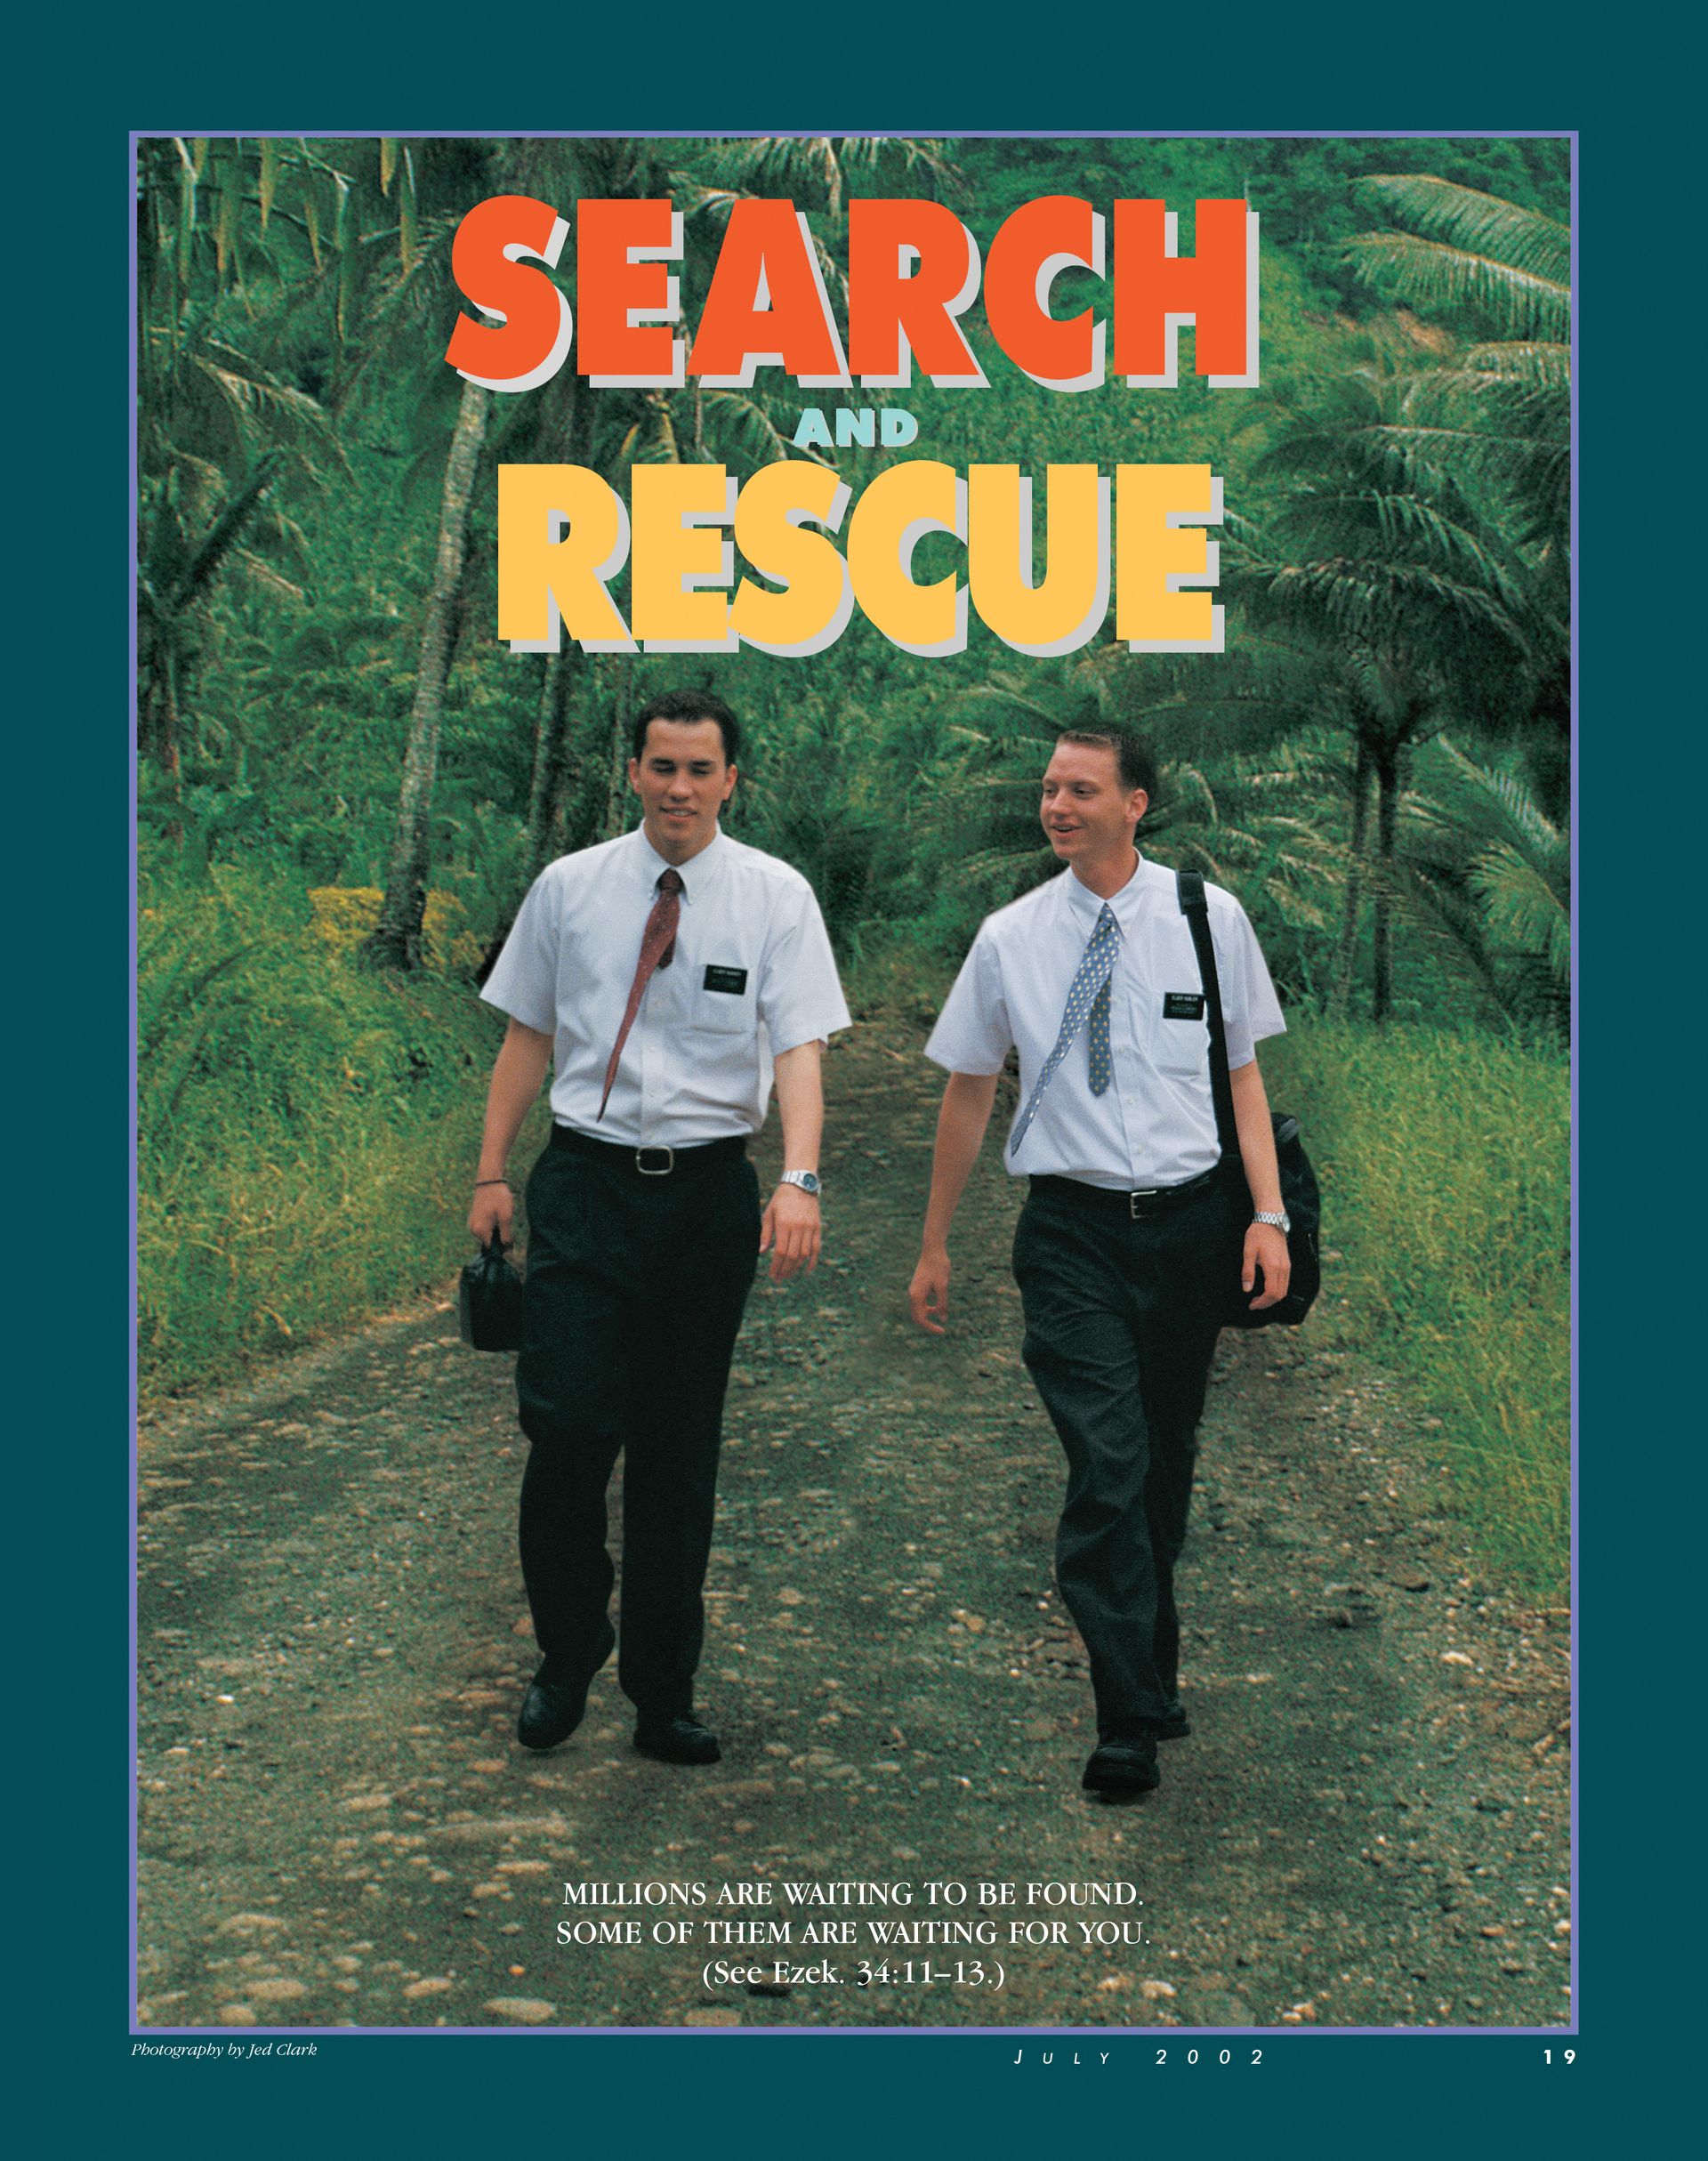 Search and Rescue. Millions are waiting to be found. Some of them are waiting for you. (See Ezek. 34:11–13.) July 2002 © undefined ipCode 1.